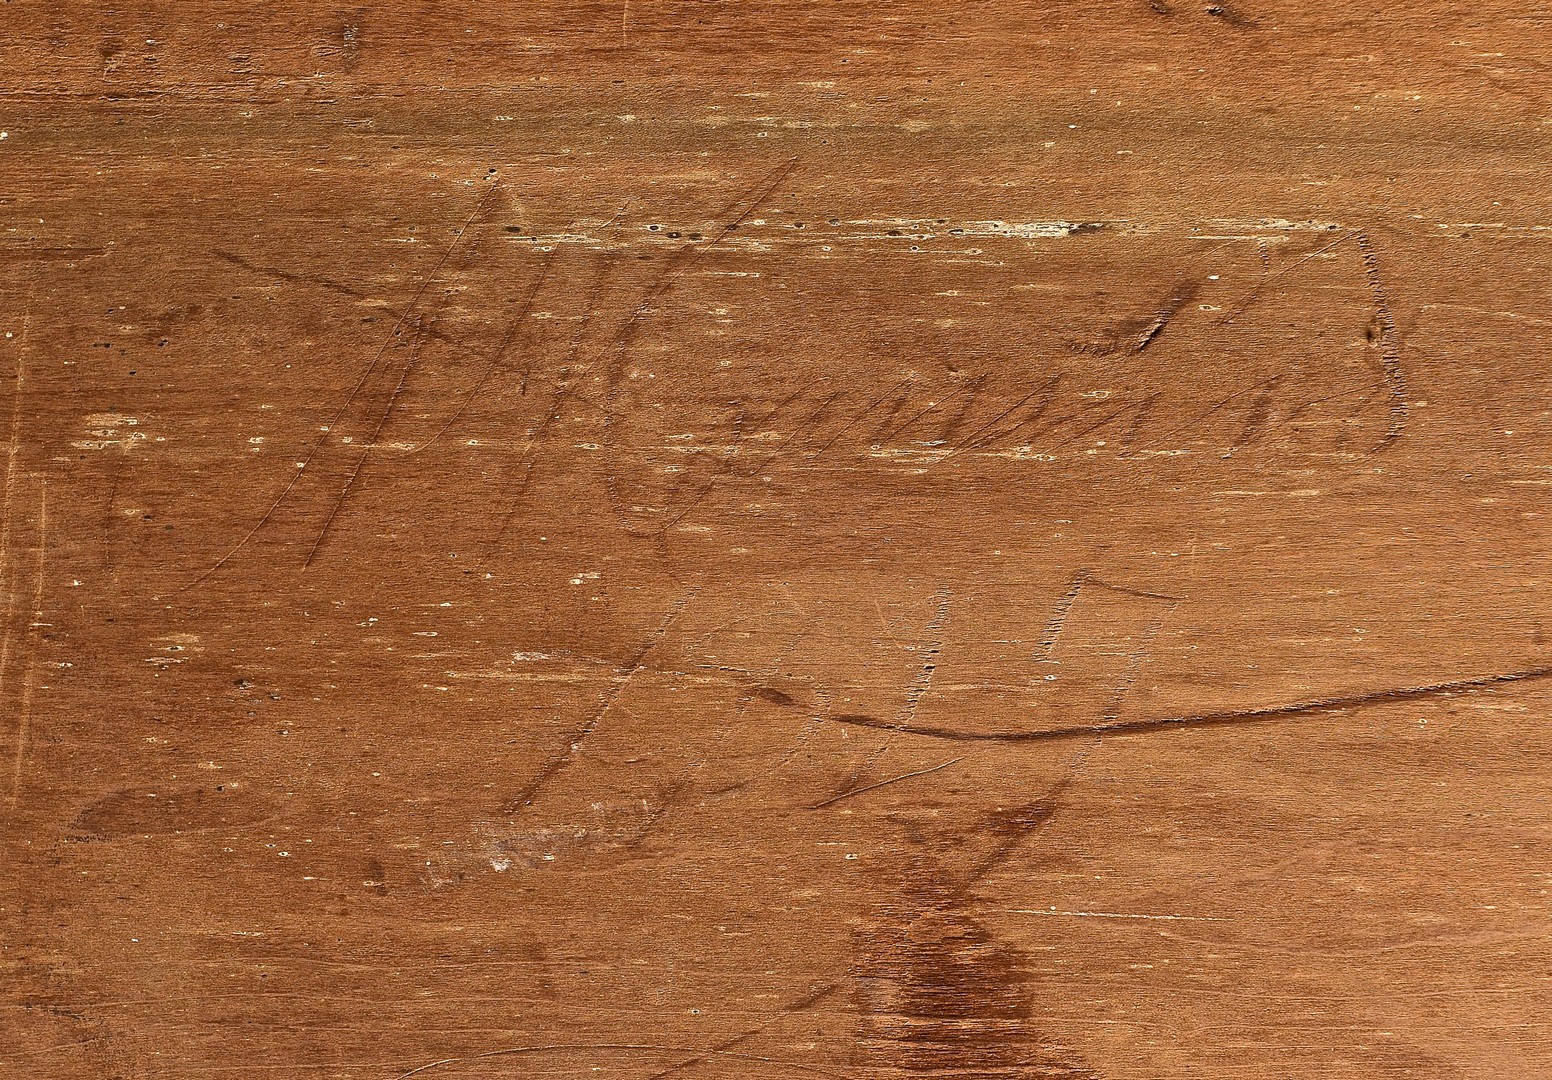 Lot 284: East TN Chest of Drawers, signed A. Hansard